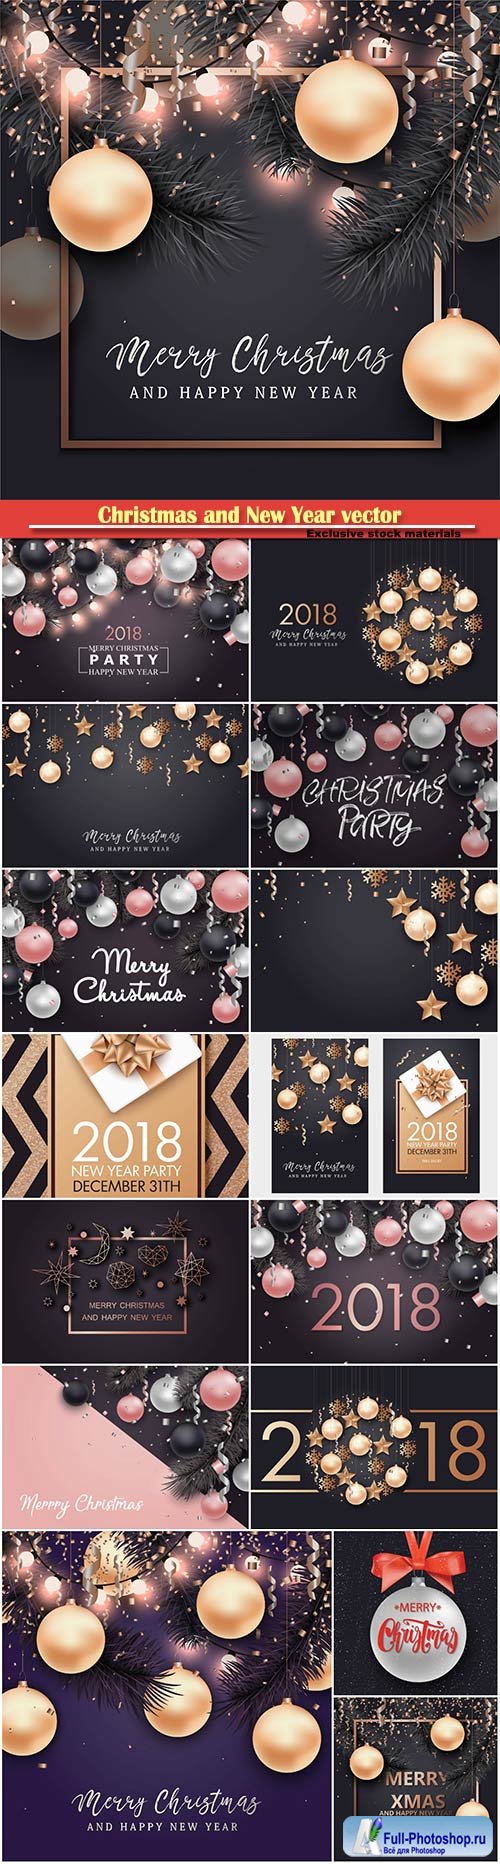 Christmas and New Year vector background for holiday greeting card, invitation, party flyer